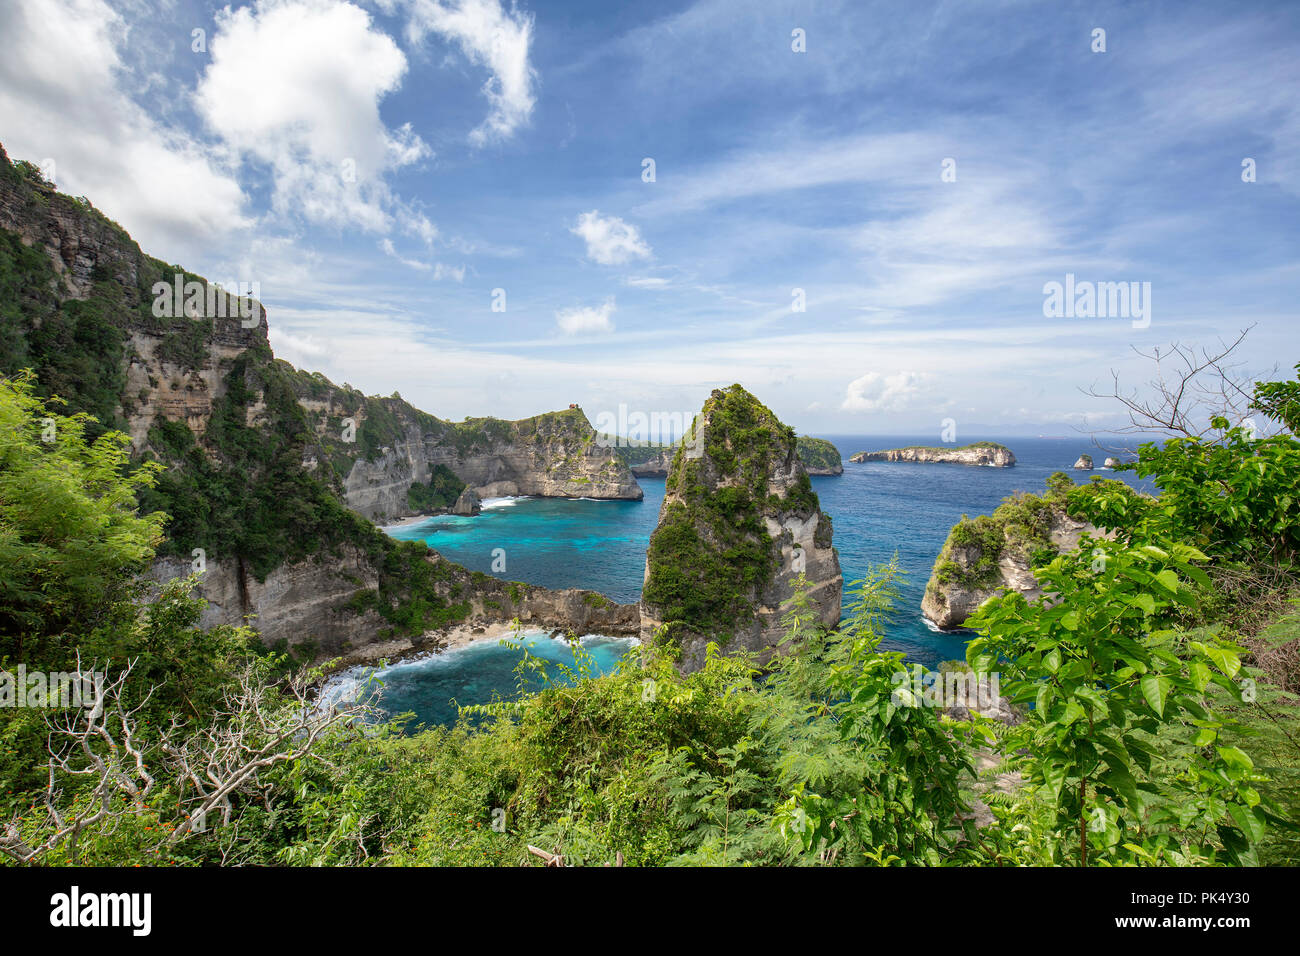 Tropical plants frame the Raja Lima islands in the distance on Nusa Penida, Indonesia. Stock Photo